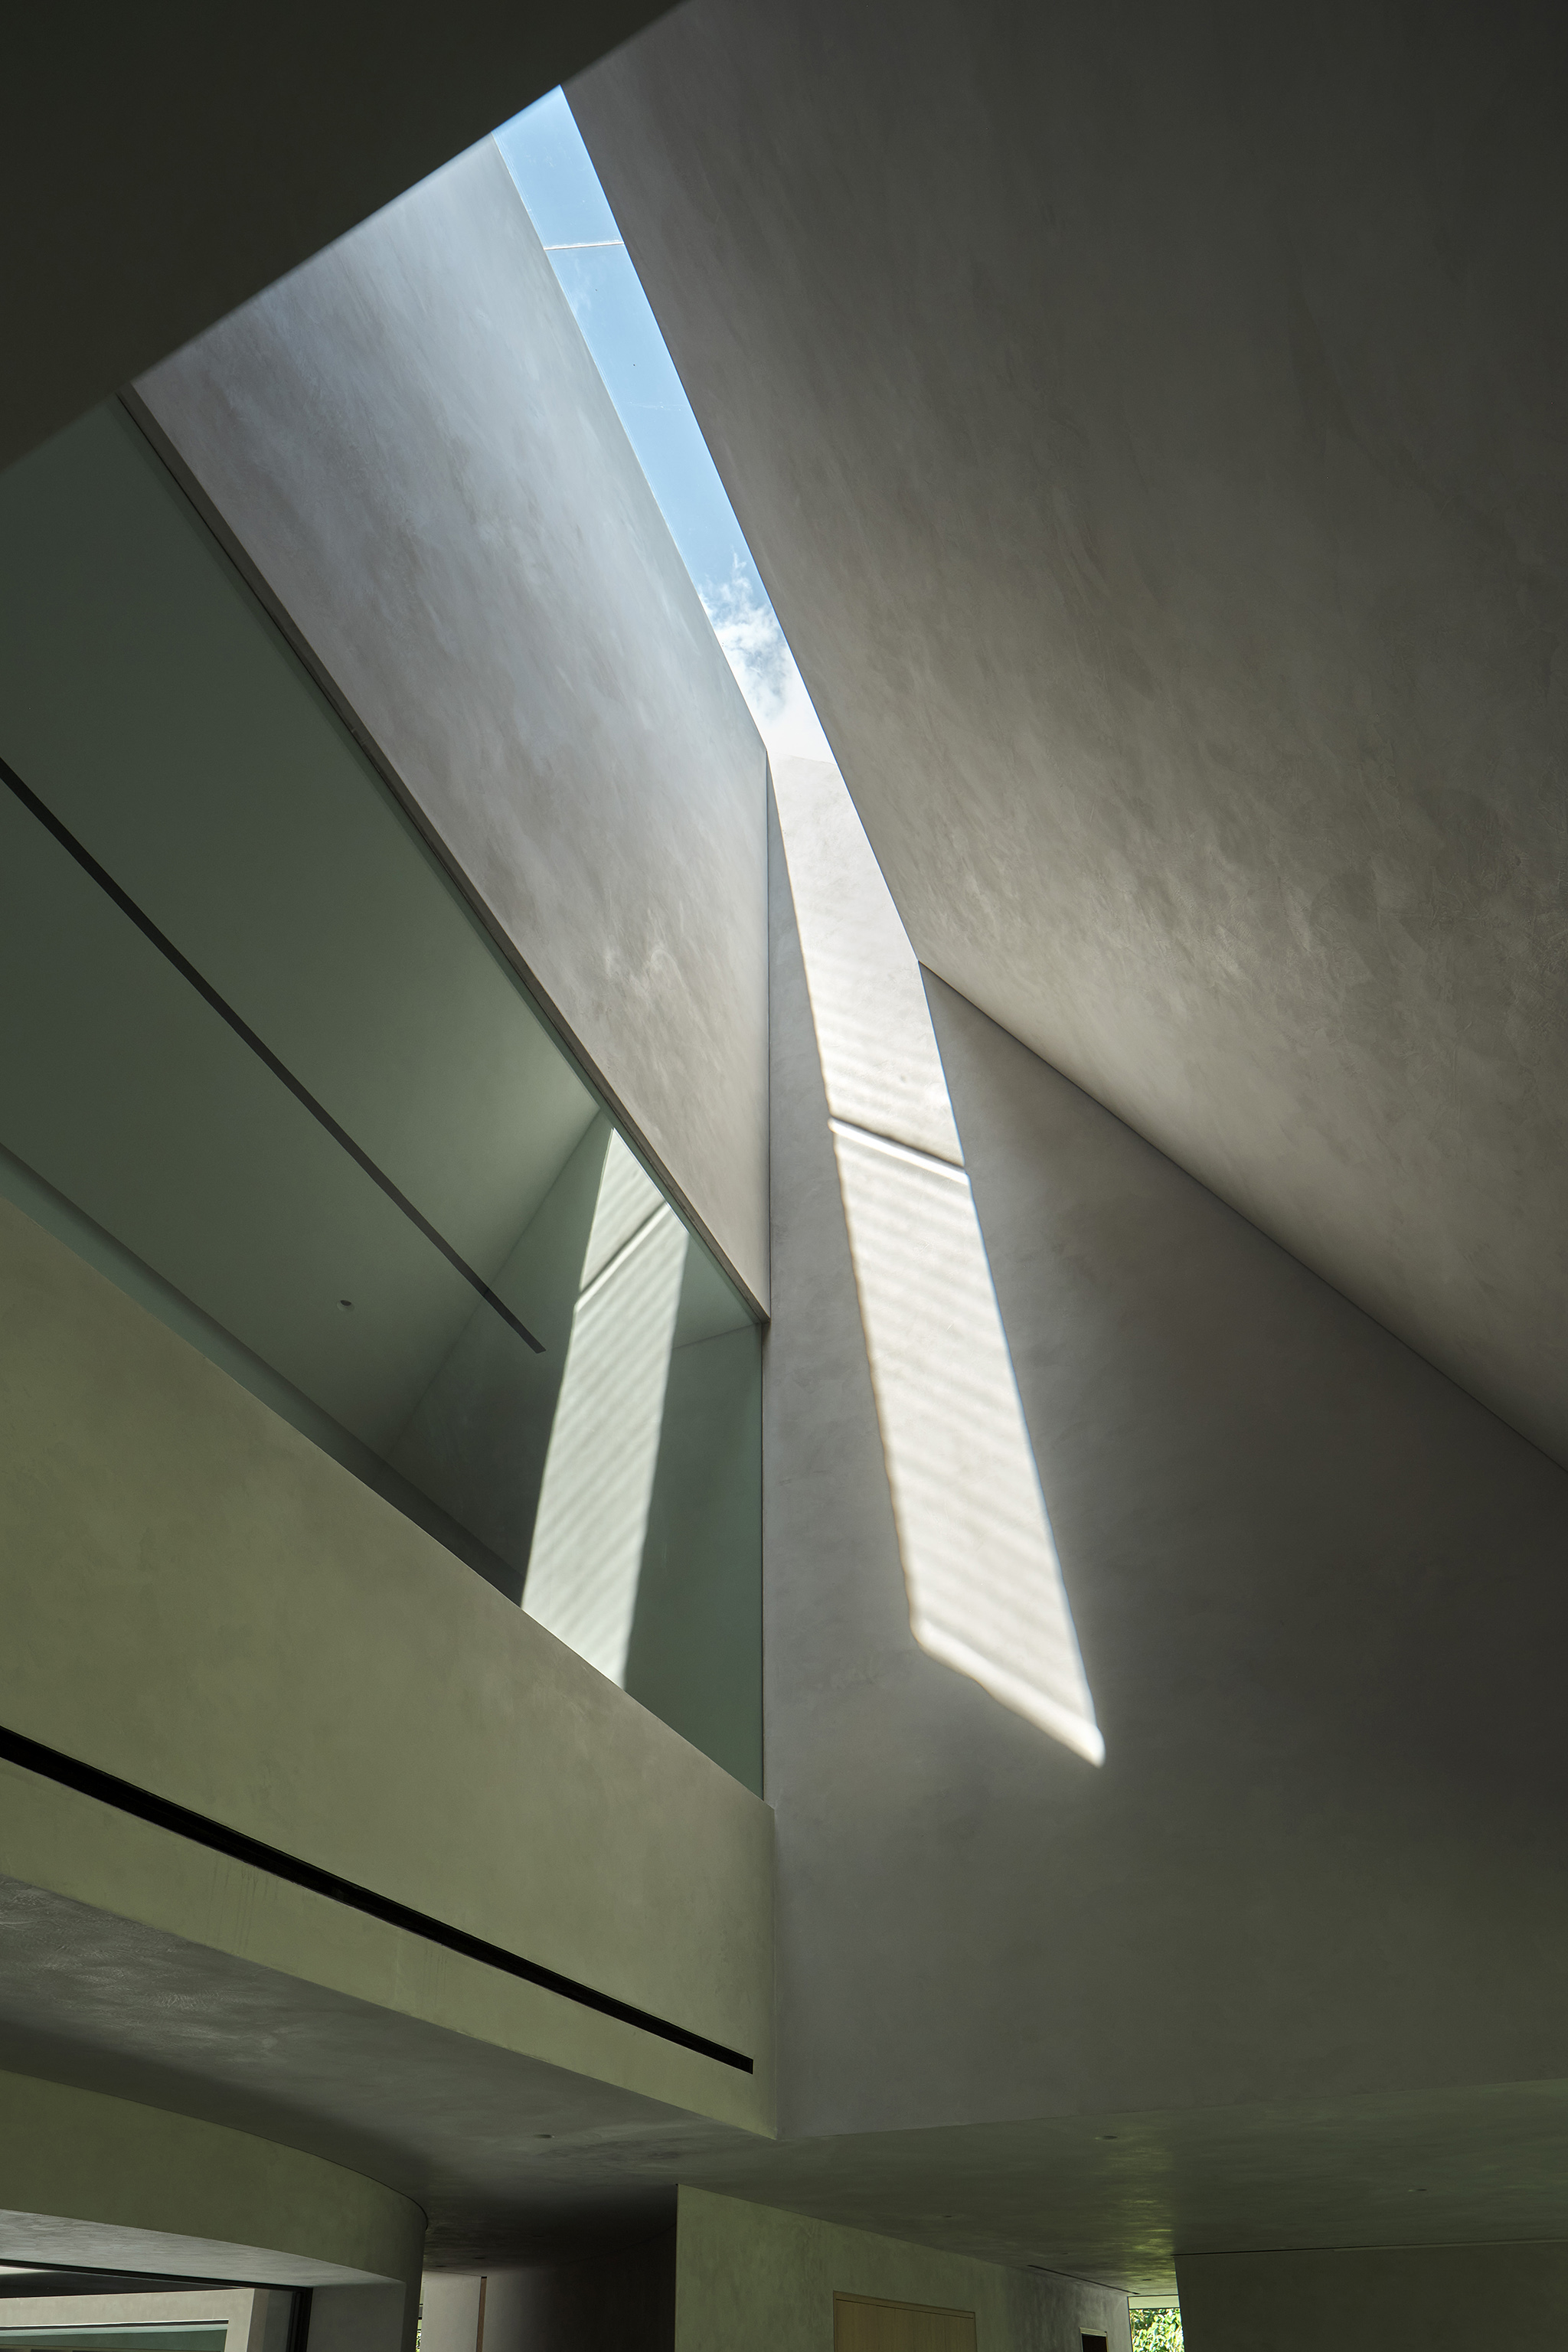 skylights that function as air and light circulation